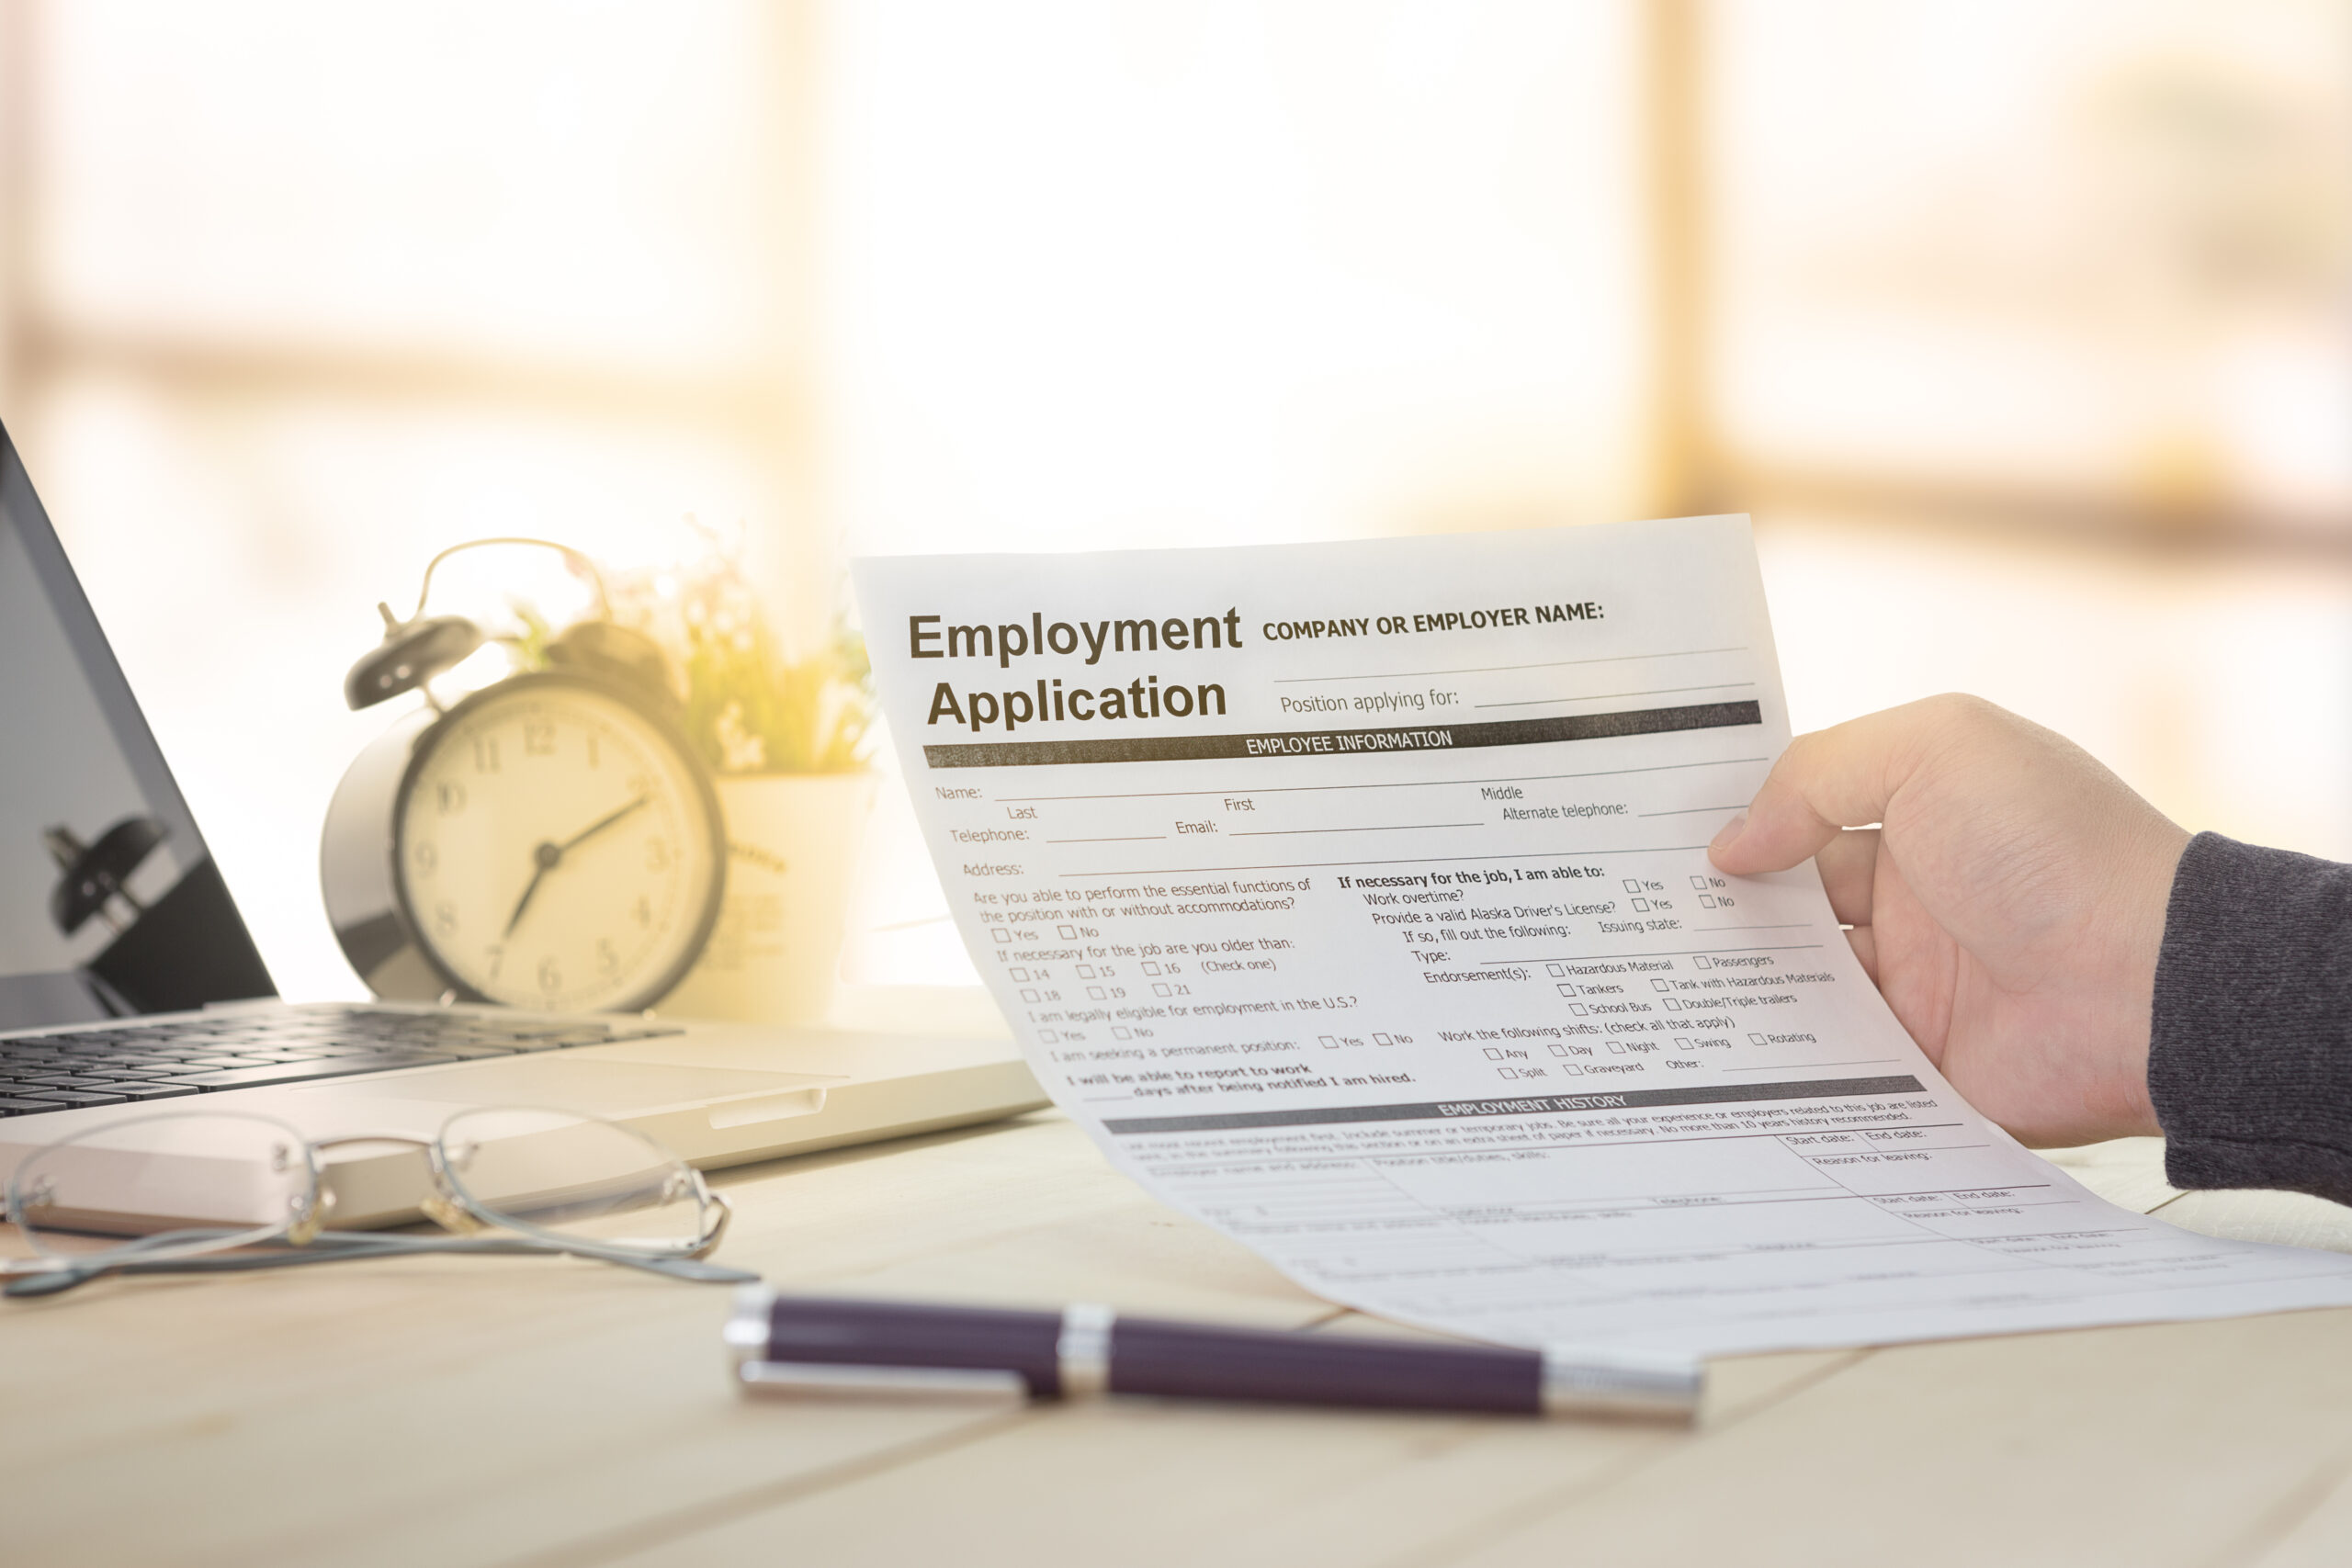 Court of Appeals Clarifies that New York’s Anti Discrimination Laws Apply to Out-of-State Job Applicants